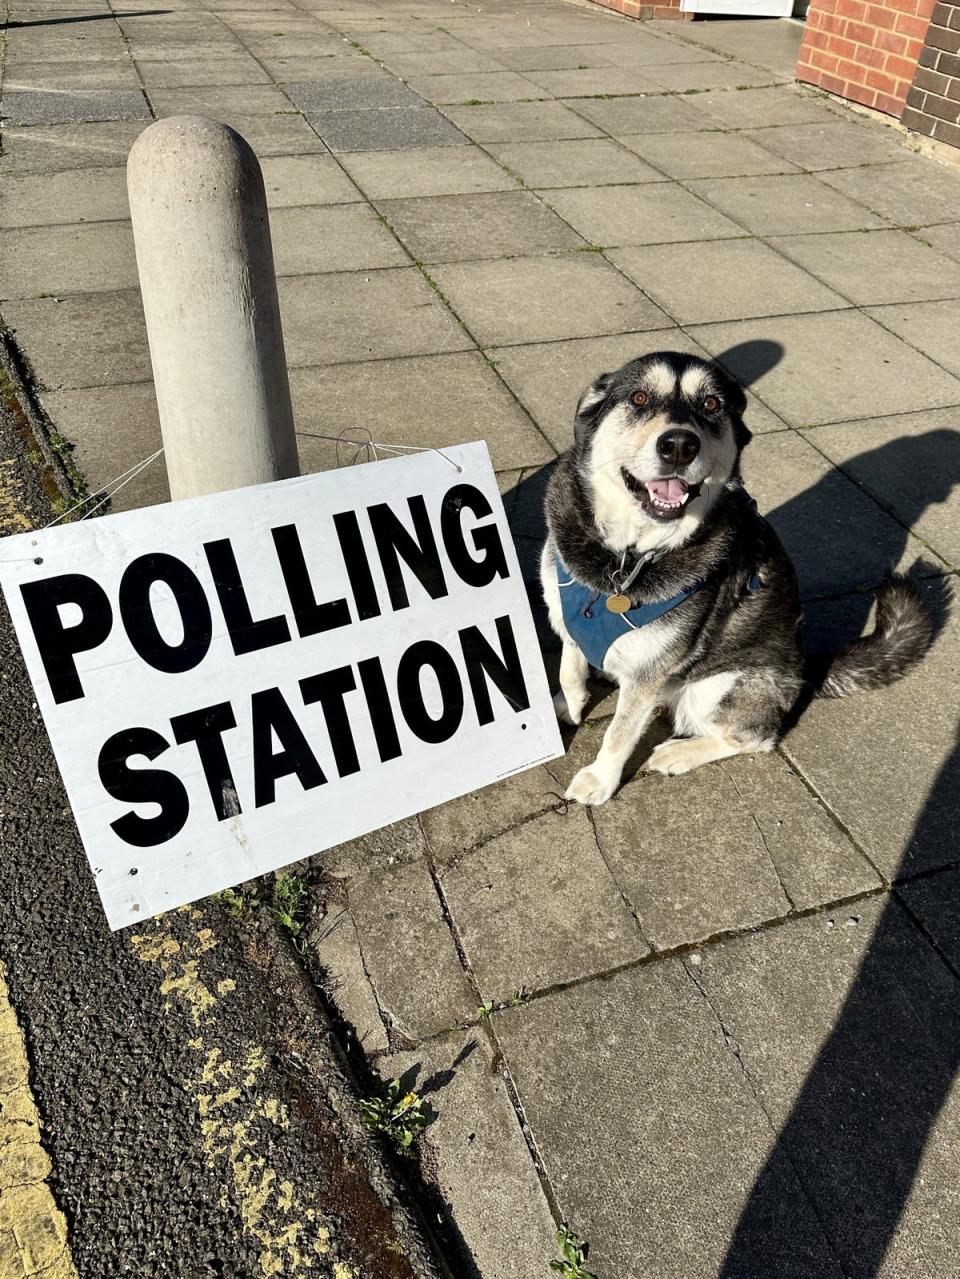 Sky at the polling station in Bedfordshire (Kathleen Eggins / submitted)